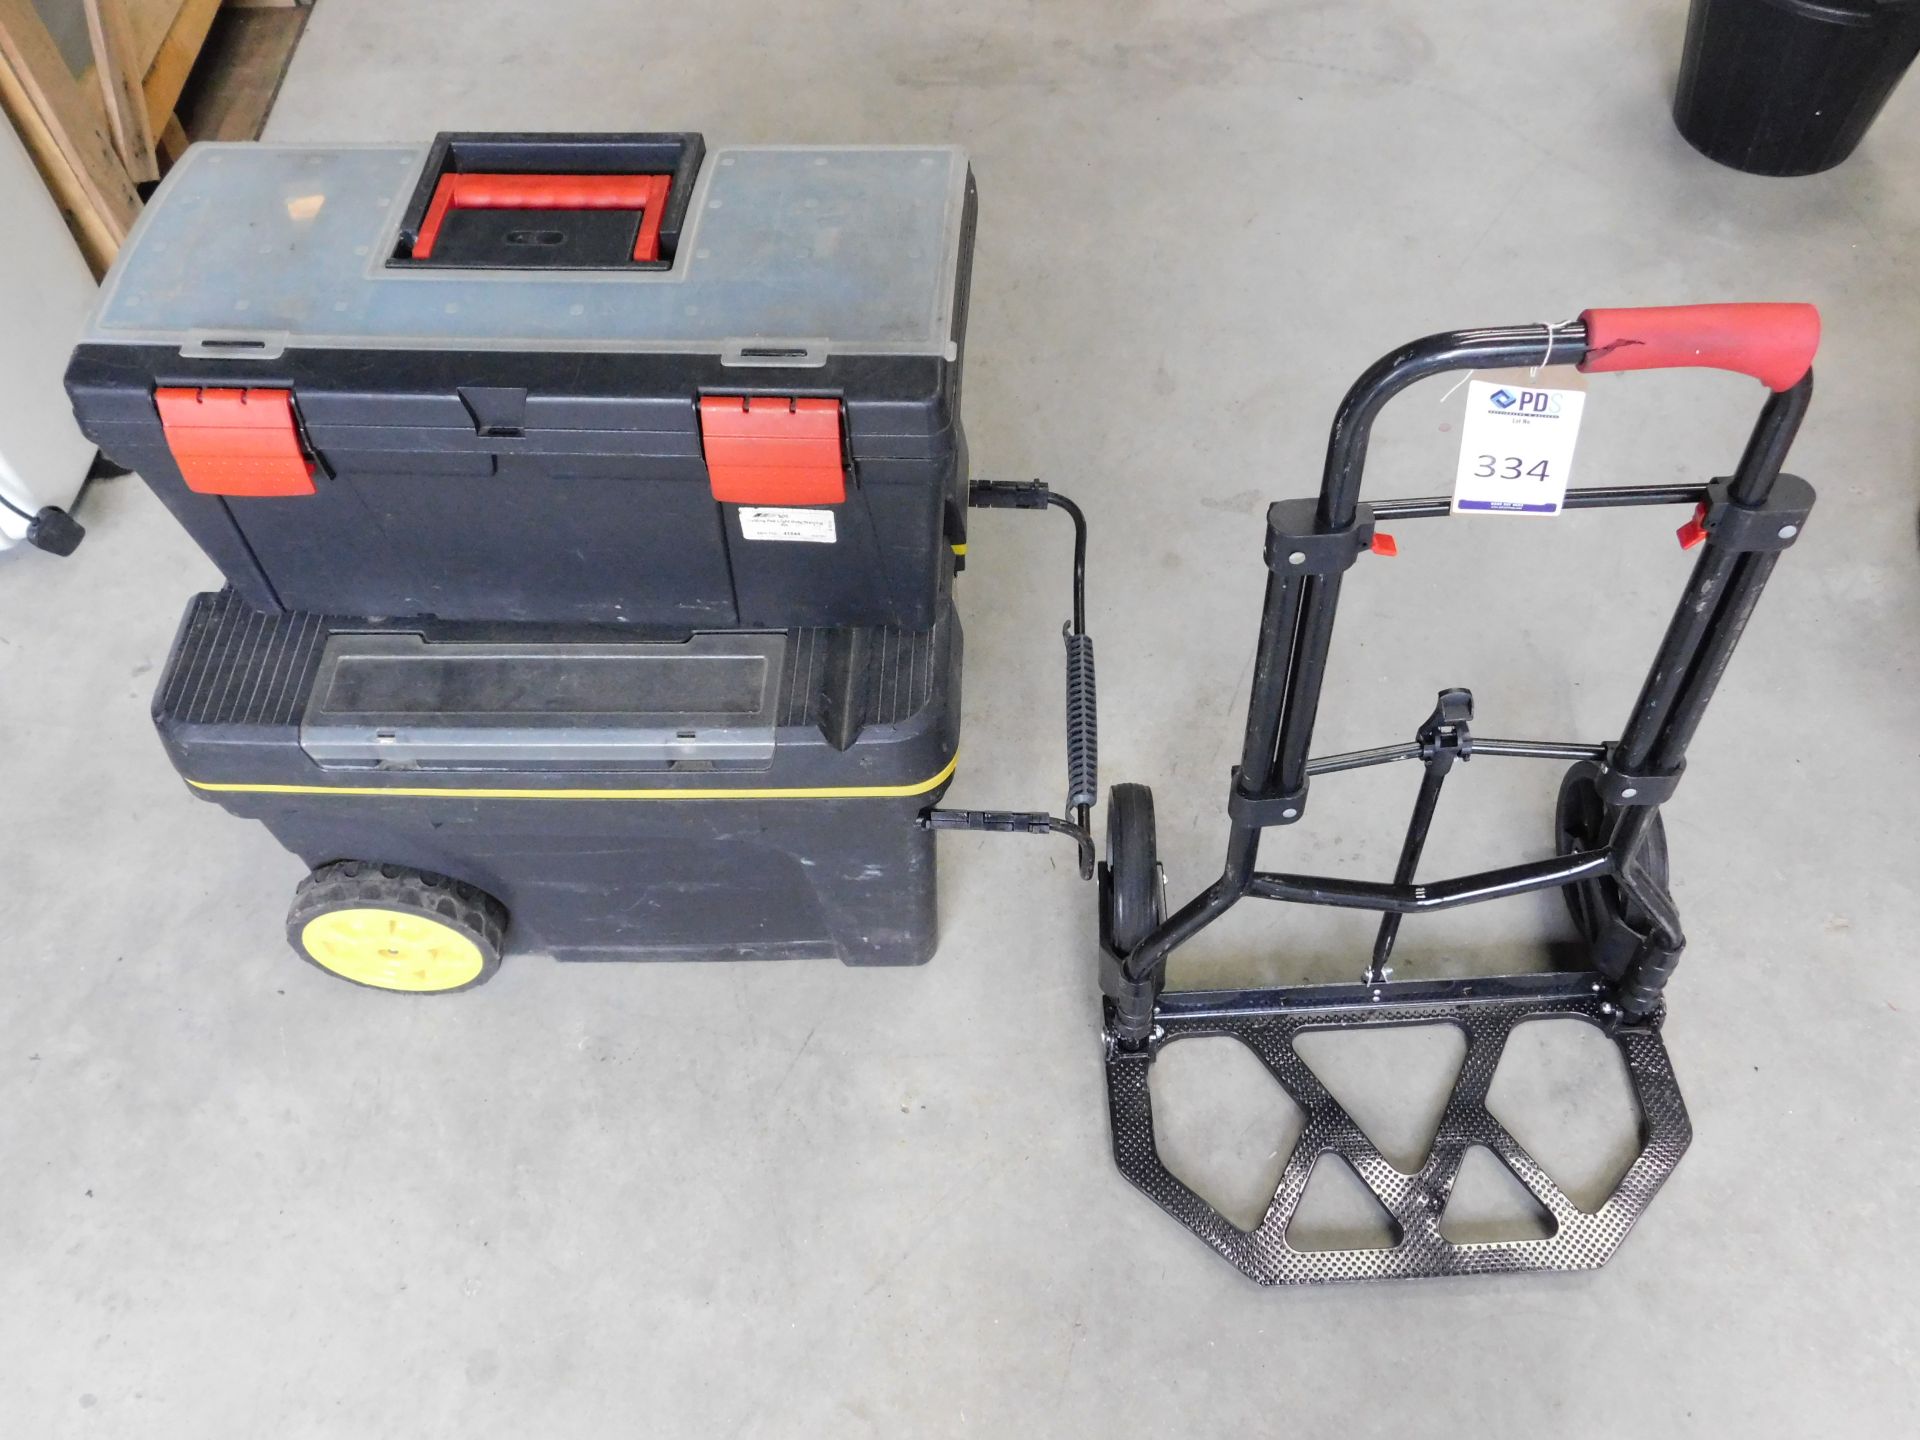 Sack Truck & 2 Toolboxes (Location Brentwood. Please Refer to General Notes)